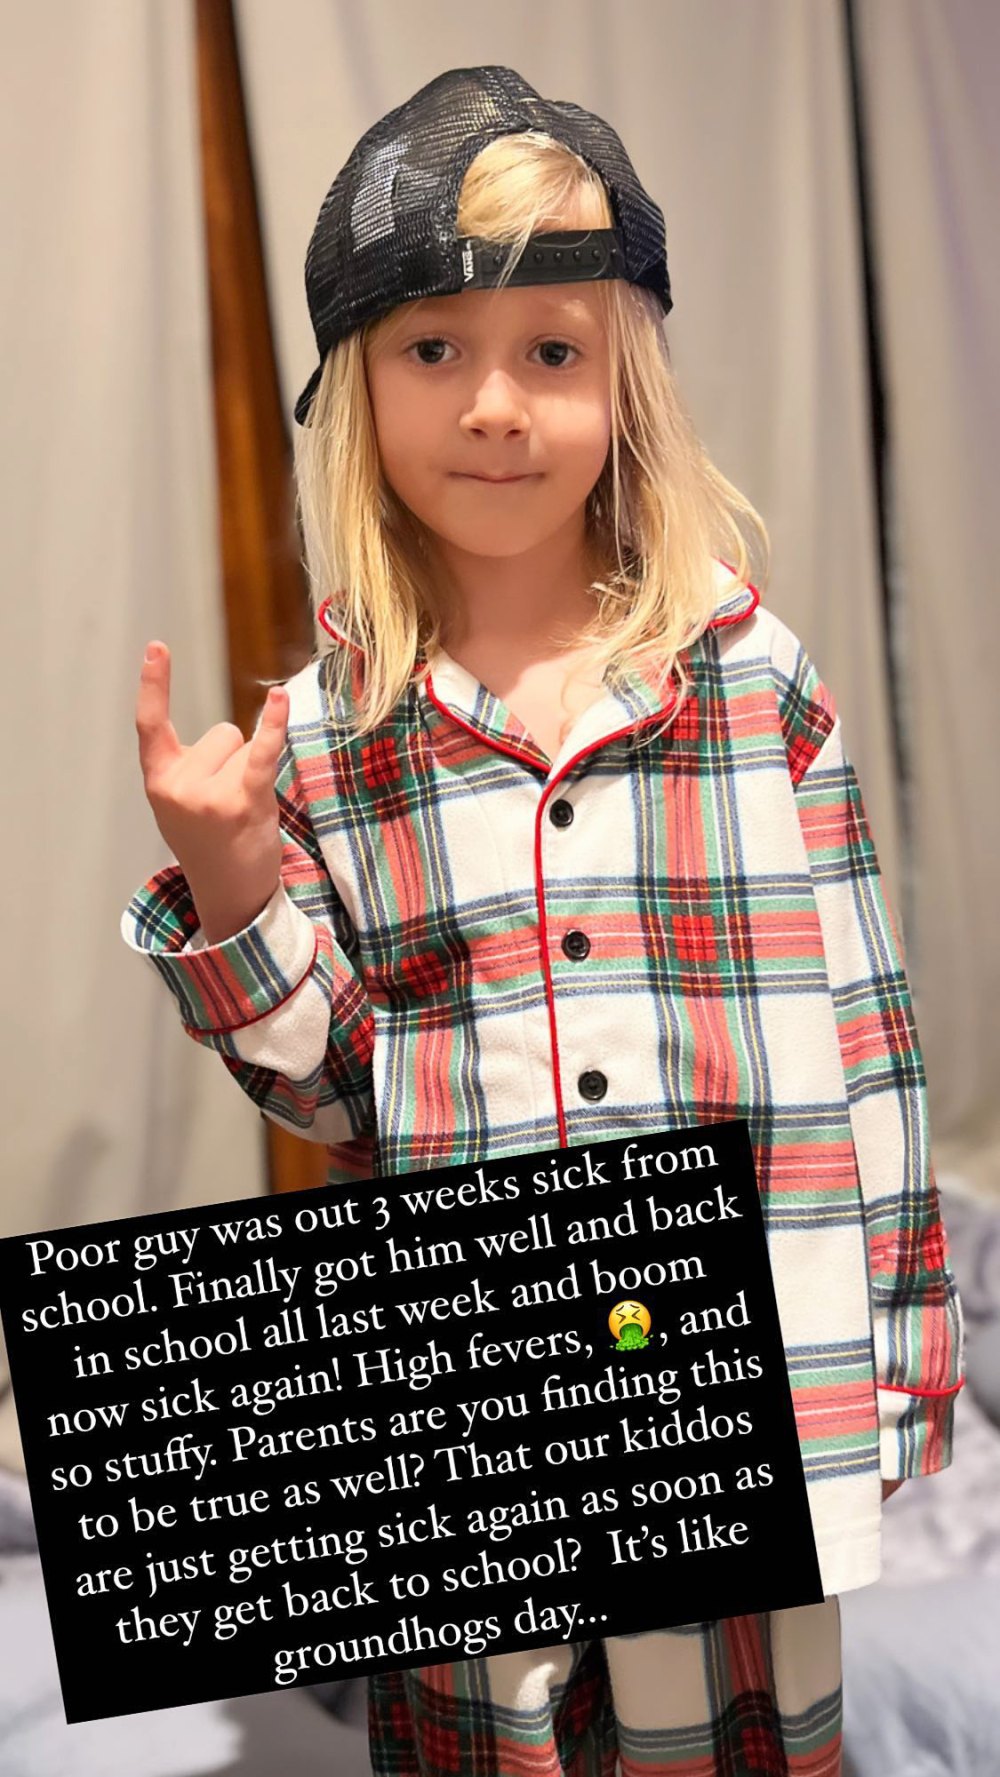 Tori Spelling Says 5-Year-old Son Beau Is ‘Sick Again’ After Missing 3 Weeks of School- It Feels Like ‘Groundhog Day’ - 104